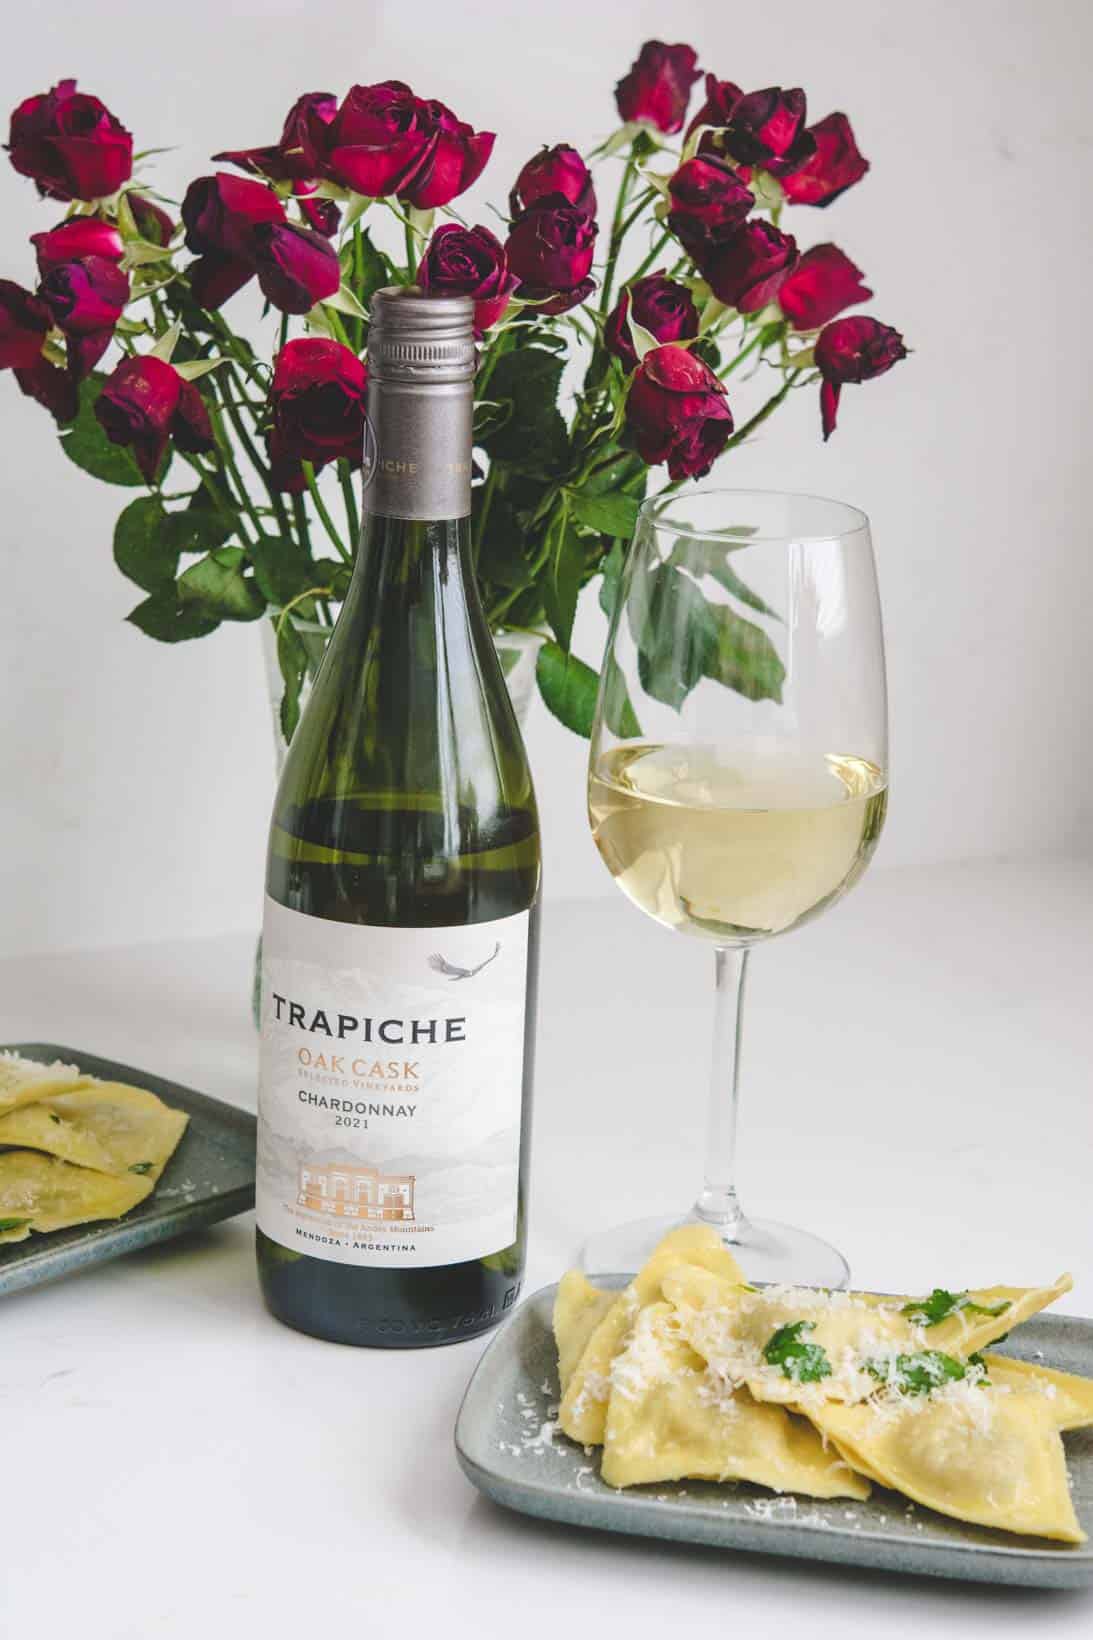 Bottle and glass of Trapiche Chardonnay with a gray rectangular plate of ravioli with grated pecorino cheese and parsley